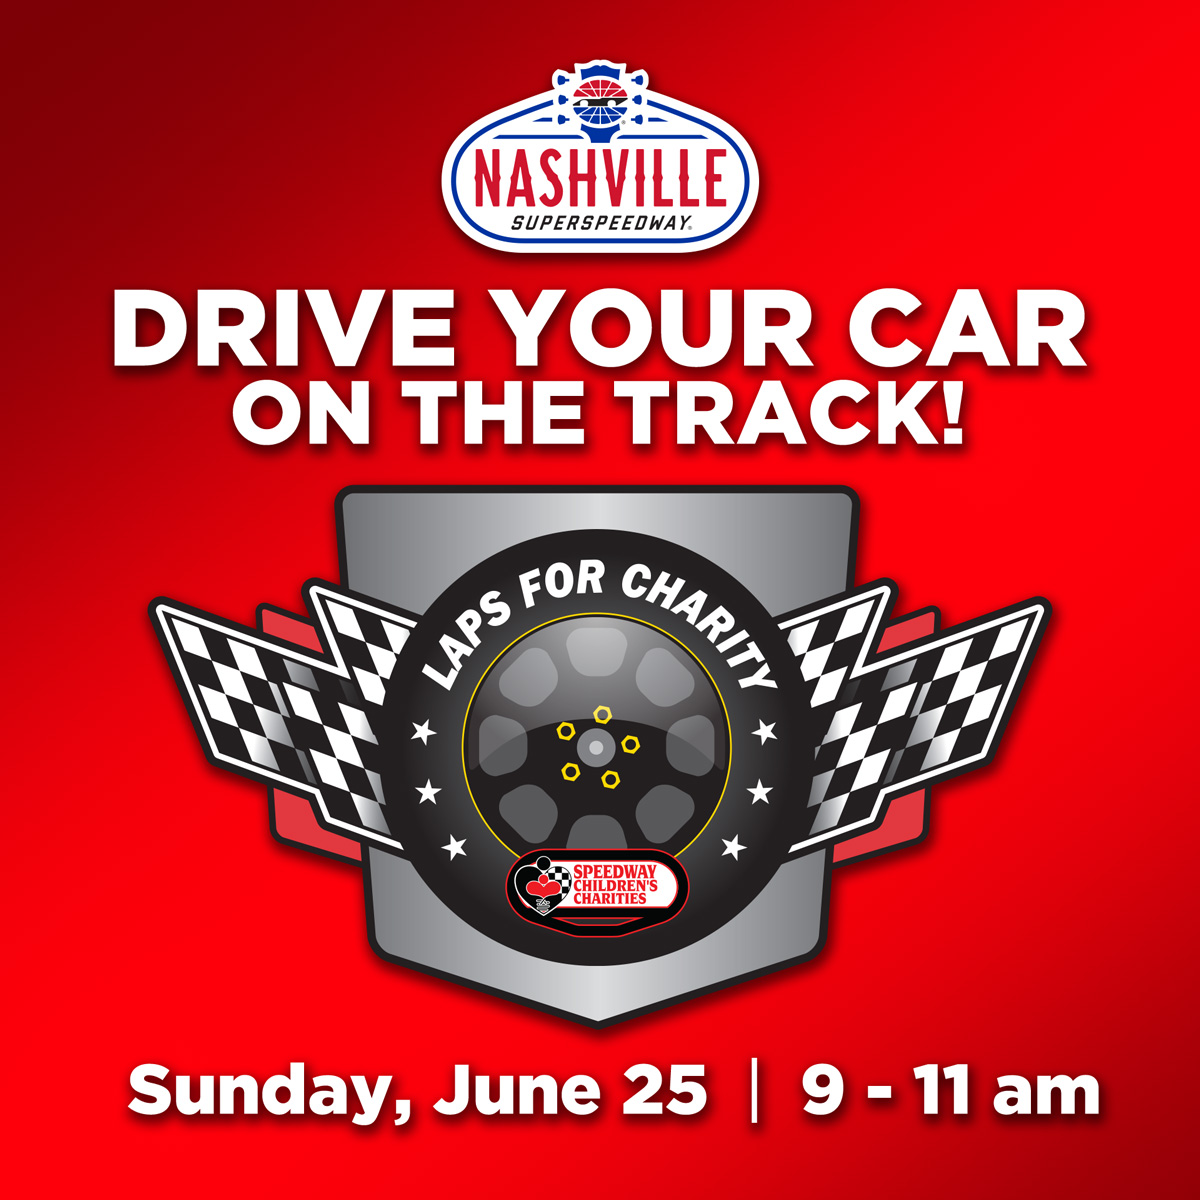 Don't wait! Sign up today to drive 3 laps in your vehicle on the @NashvilleSuperS track! You'll have a great time AND help #Nashville kids in need! Register Now: bit.ly/3PufIns #KidsWin // #Ally400